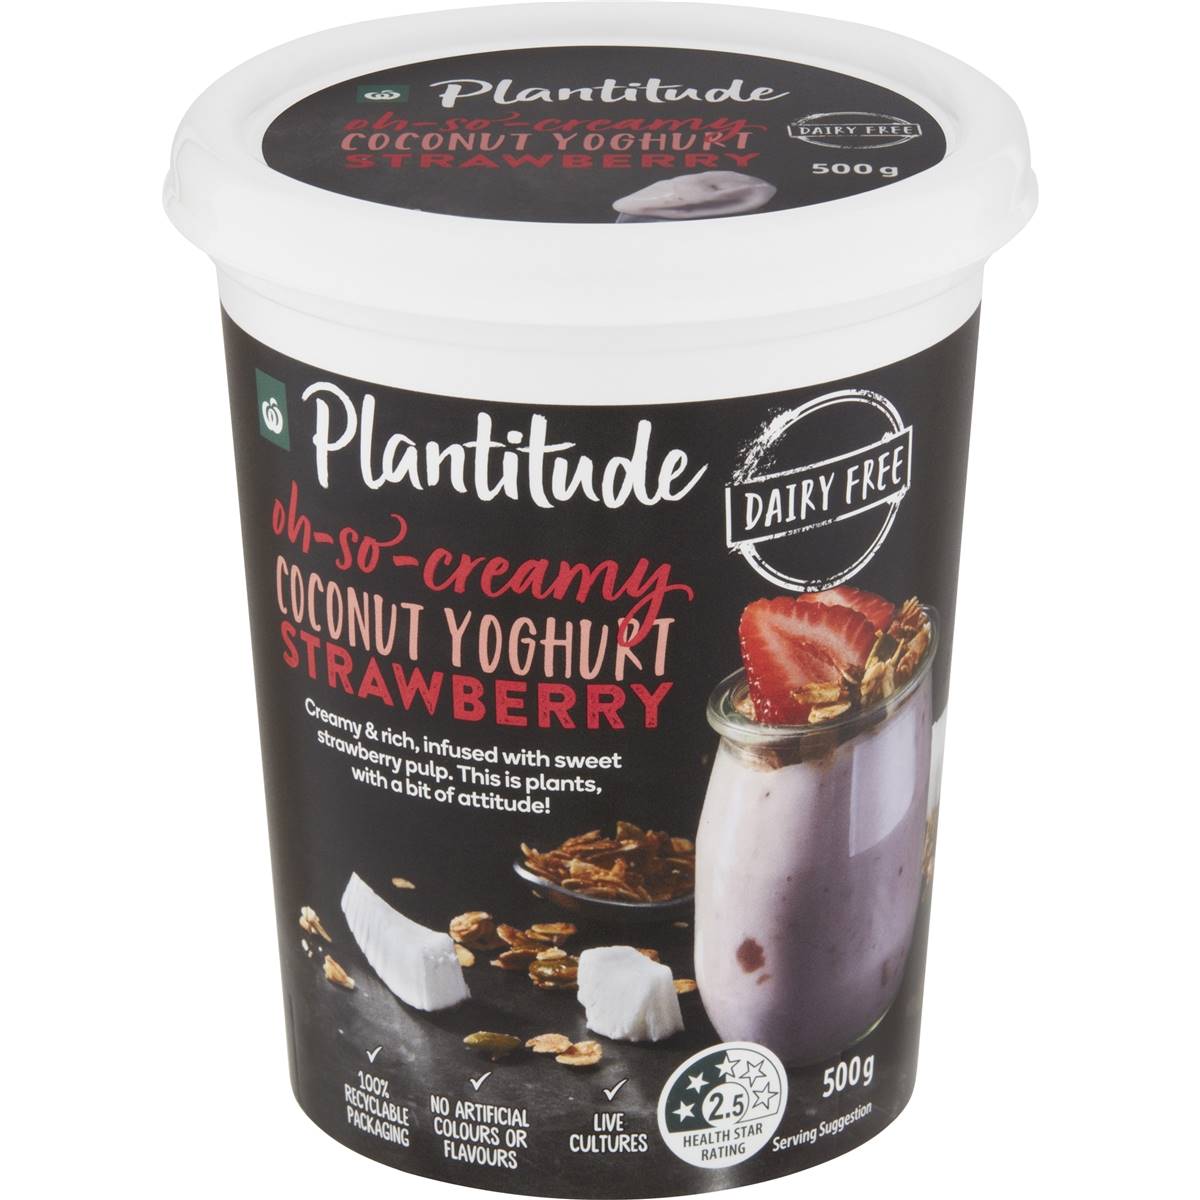 Calories in Woolworths Plantitude Dairy Free Coconut Yoghurt Strawberry